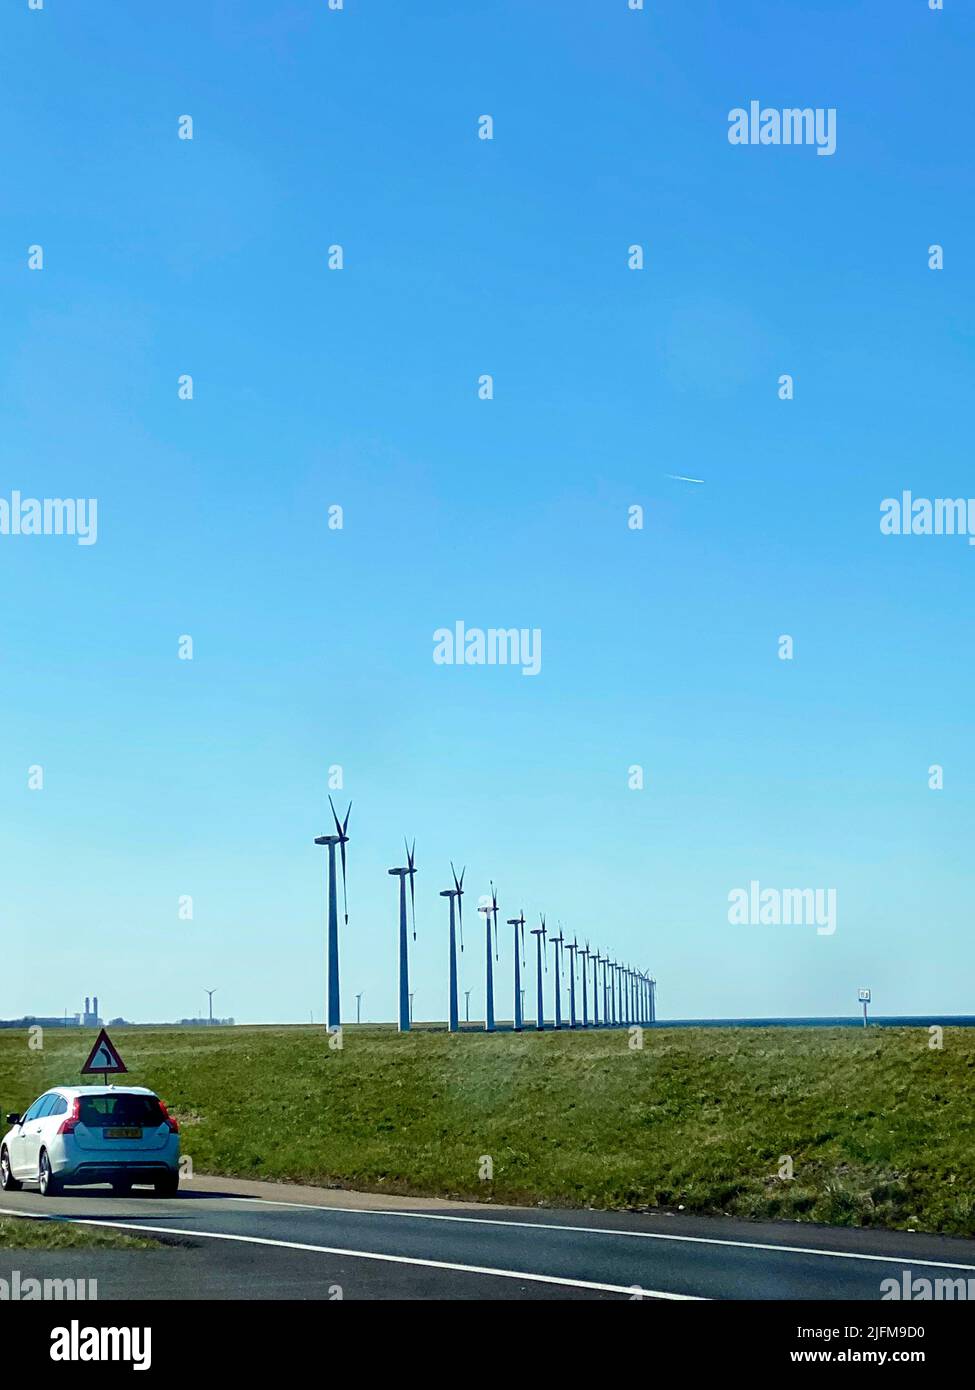 Wind turbines on a dyke near a road with a car, Netherlands Stock Photo